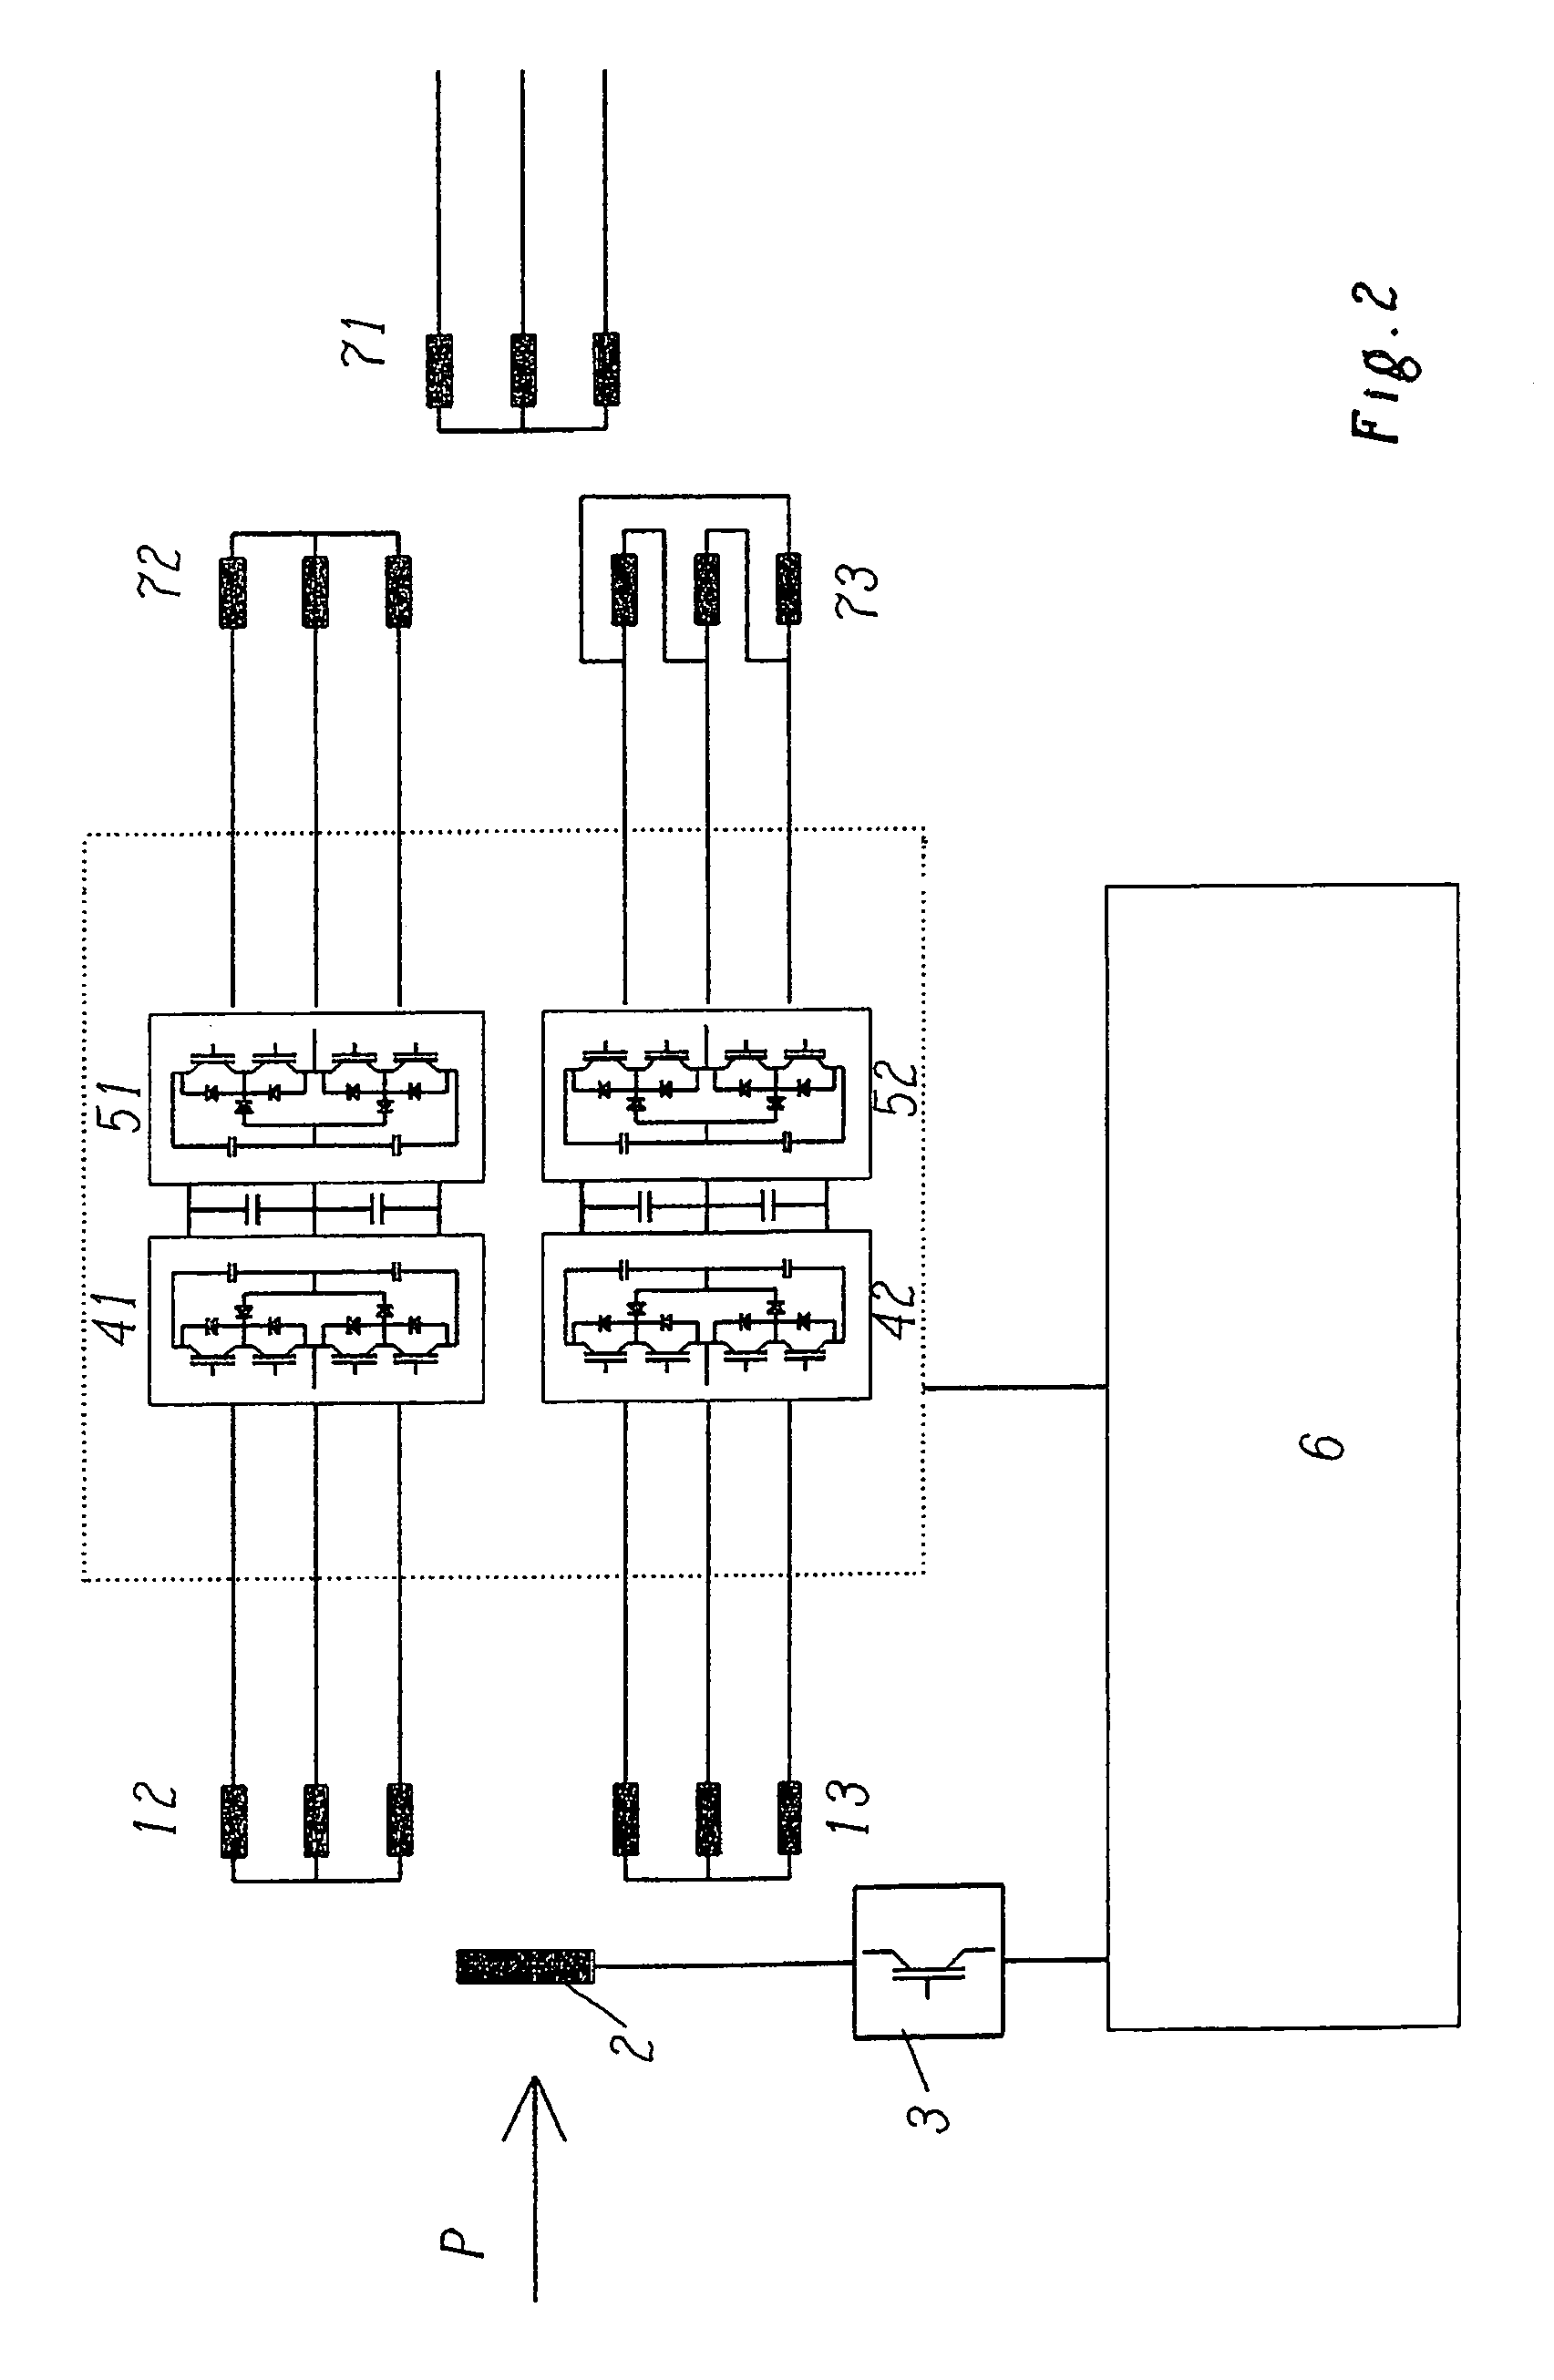 Frequency converter for high-speed generators